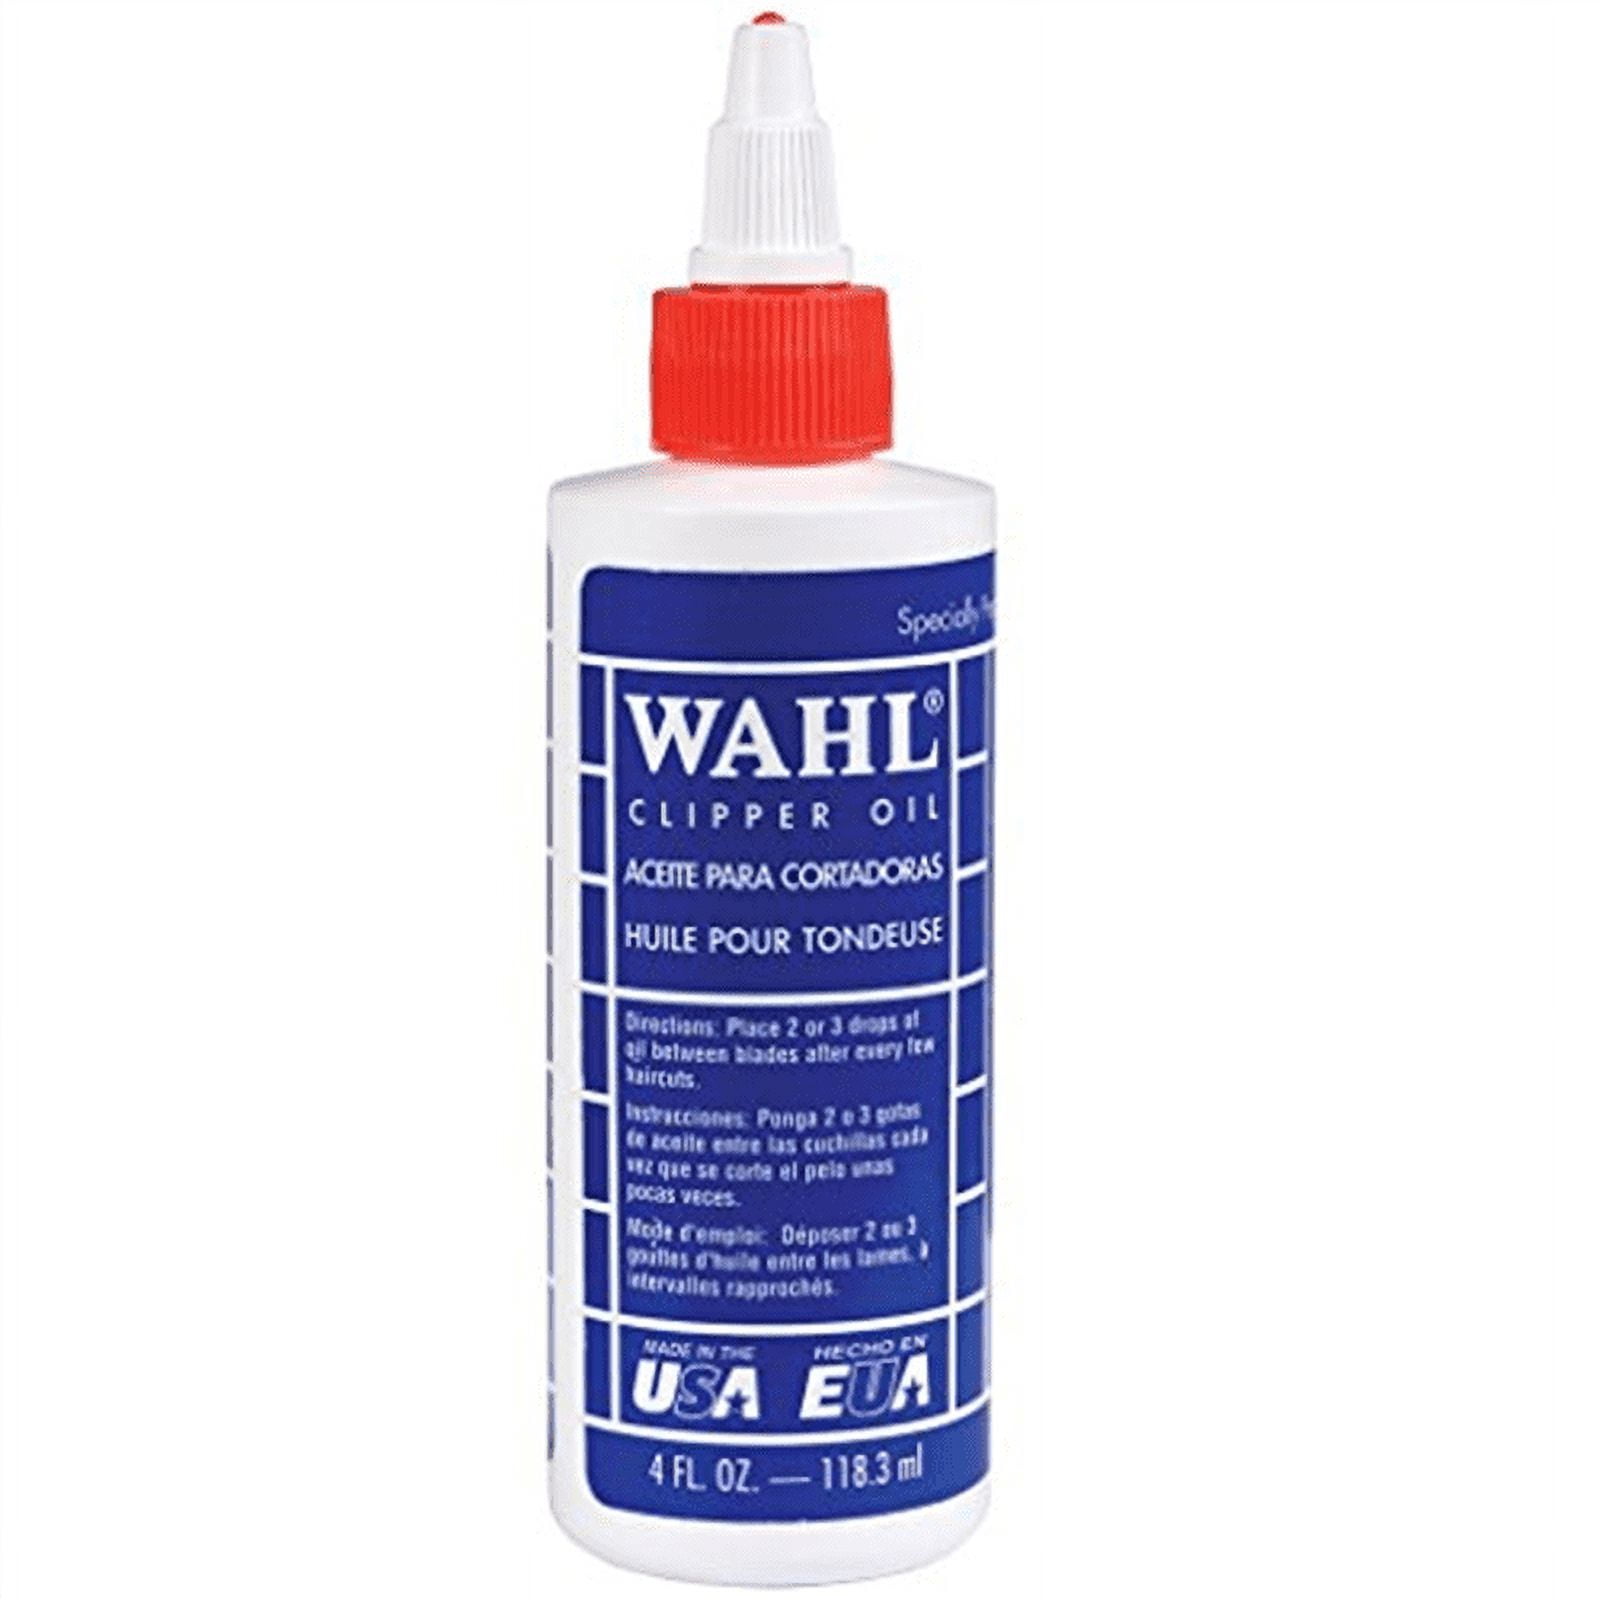 Wahl Clipper Oil, Electrical Hair Accessories